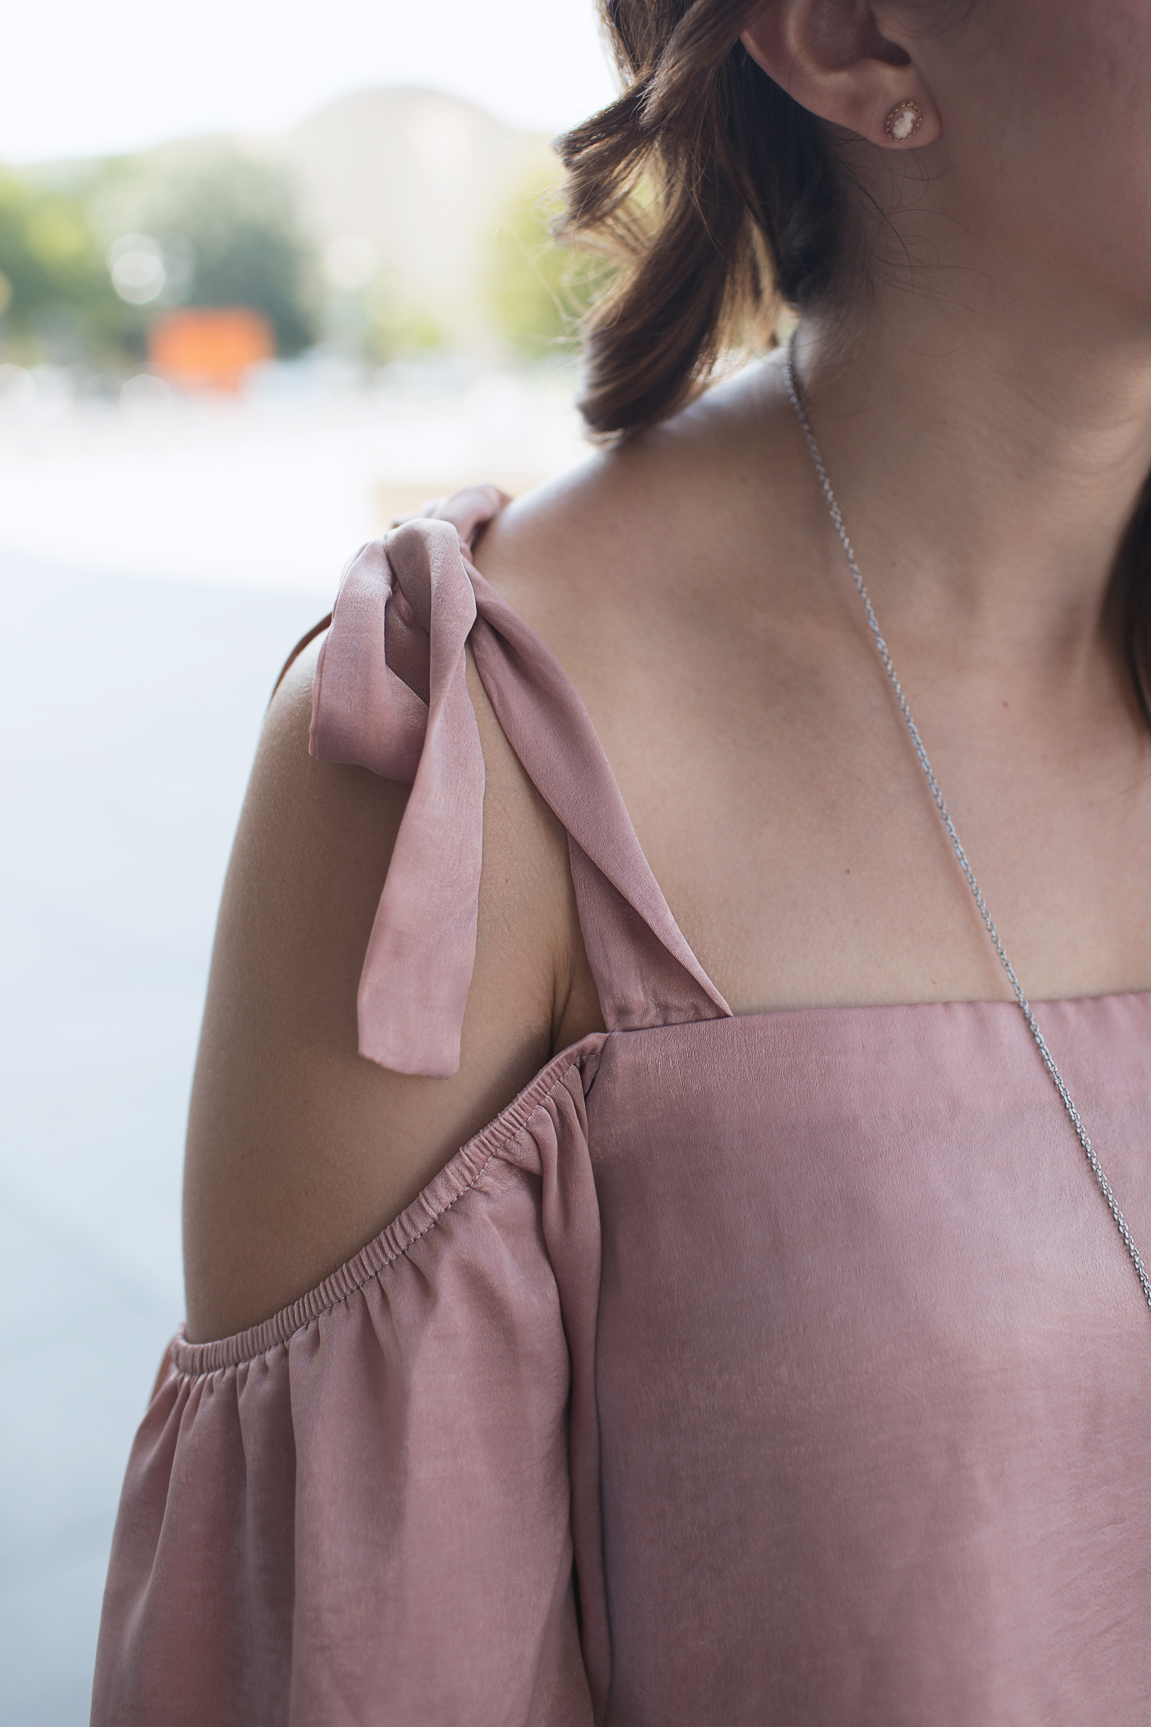 Lifestyle blogger Roxanne of Glass of Glam wearing Moonglow jewelry